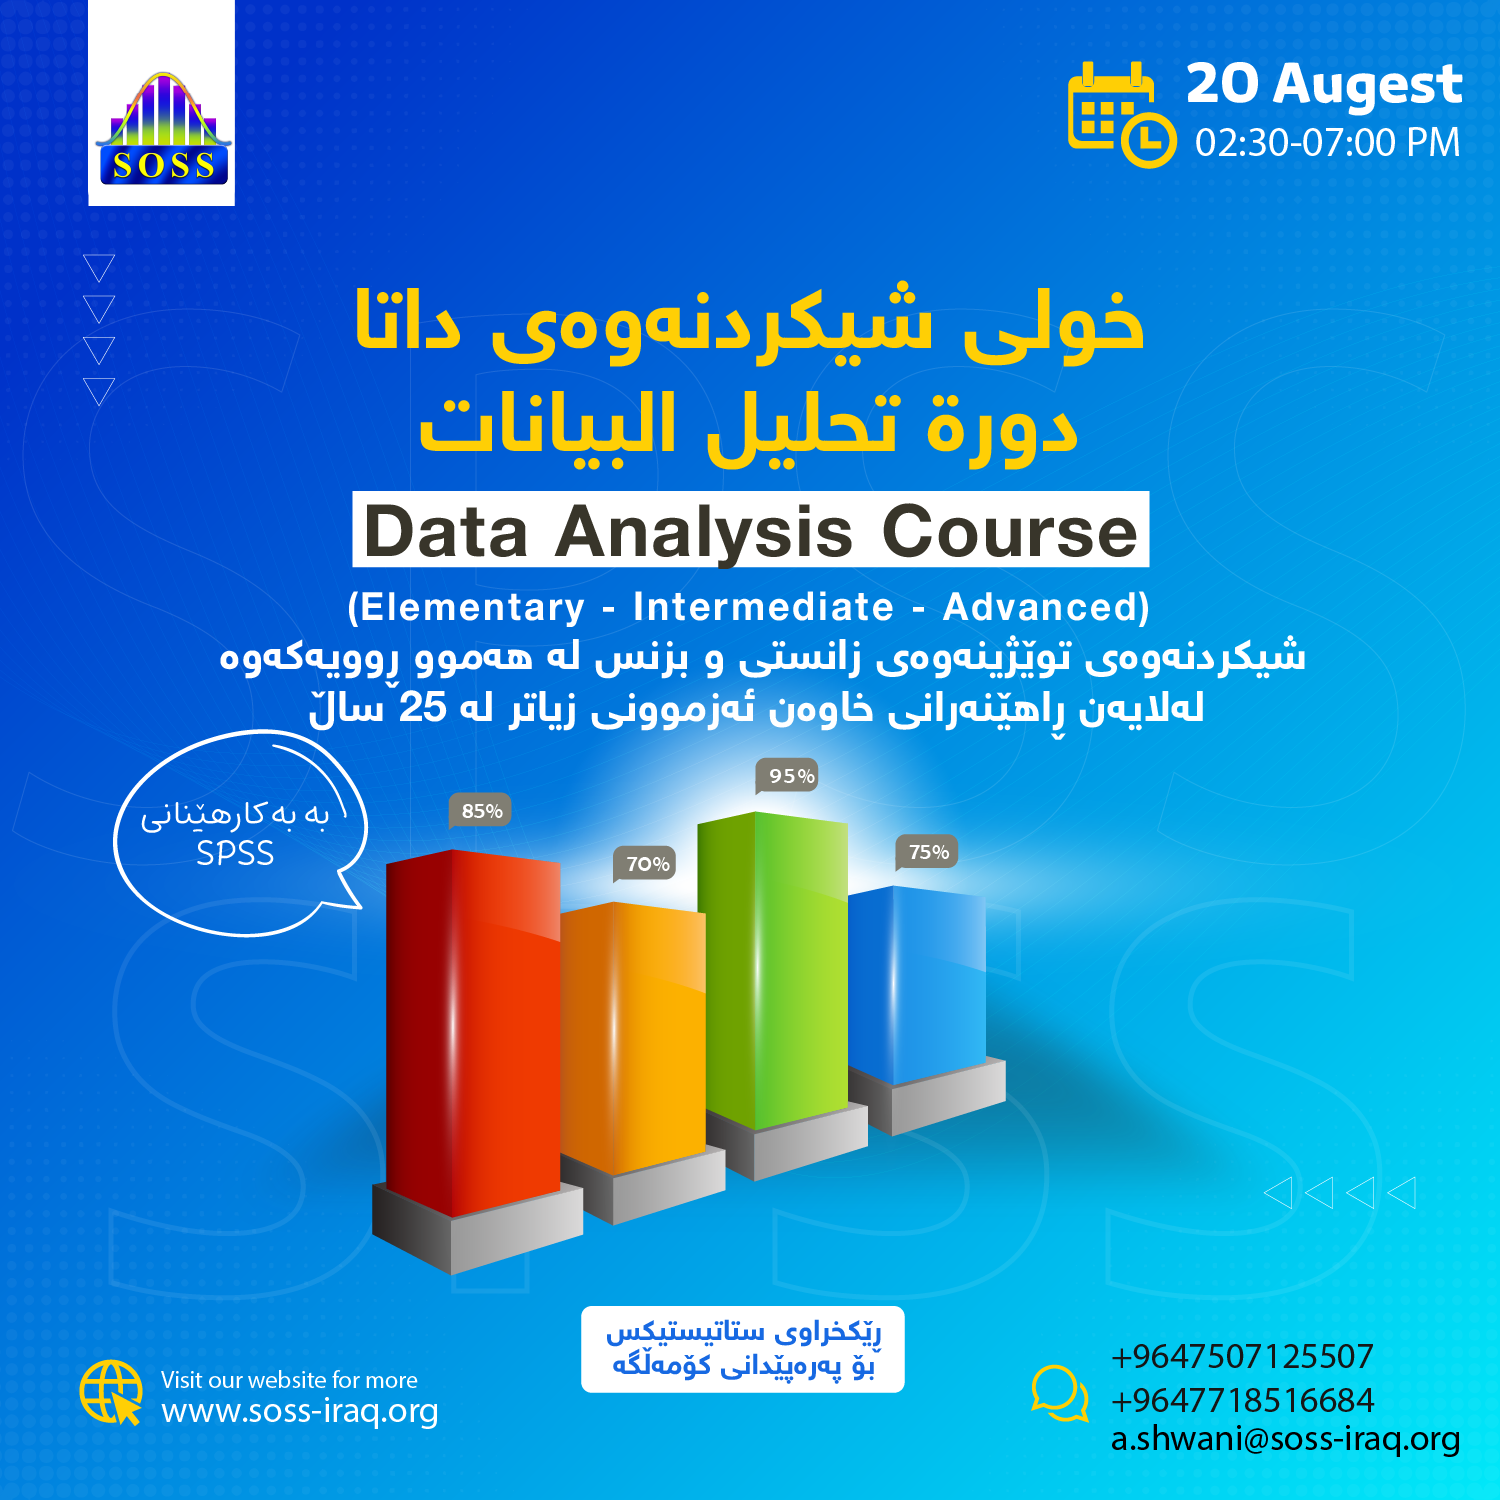 Opening A Training Course on Data Analysis Using SPSS